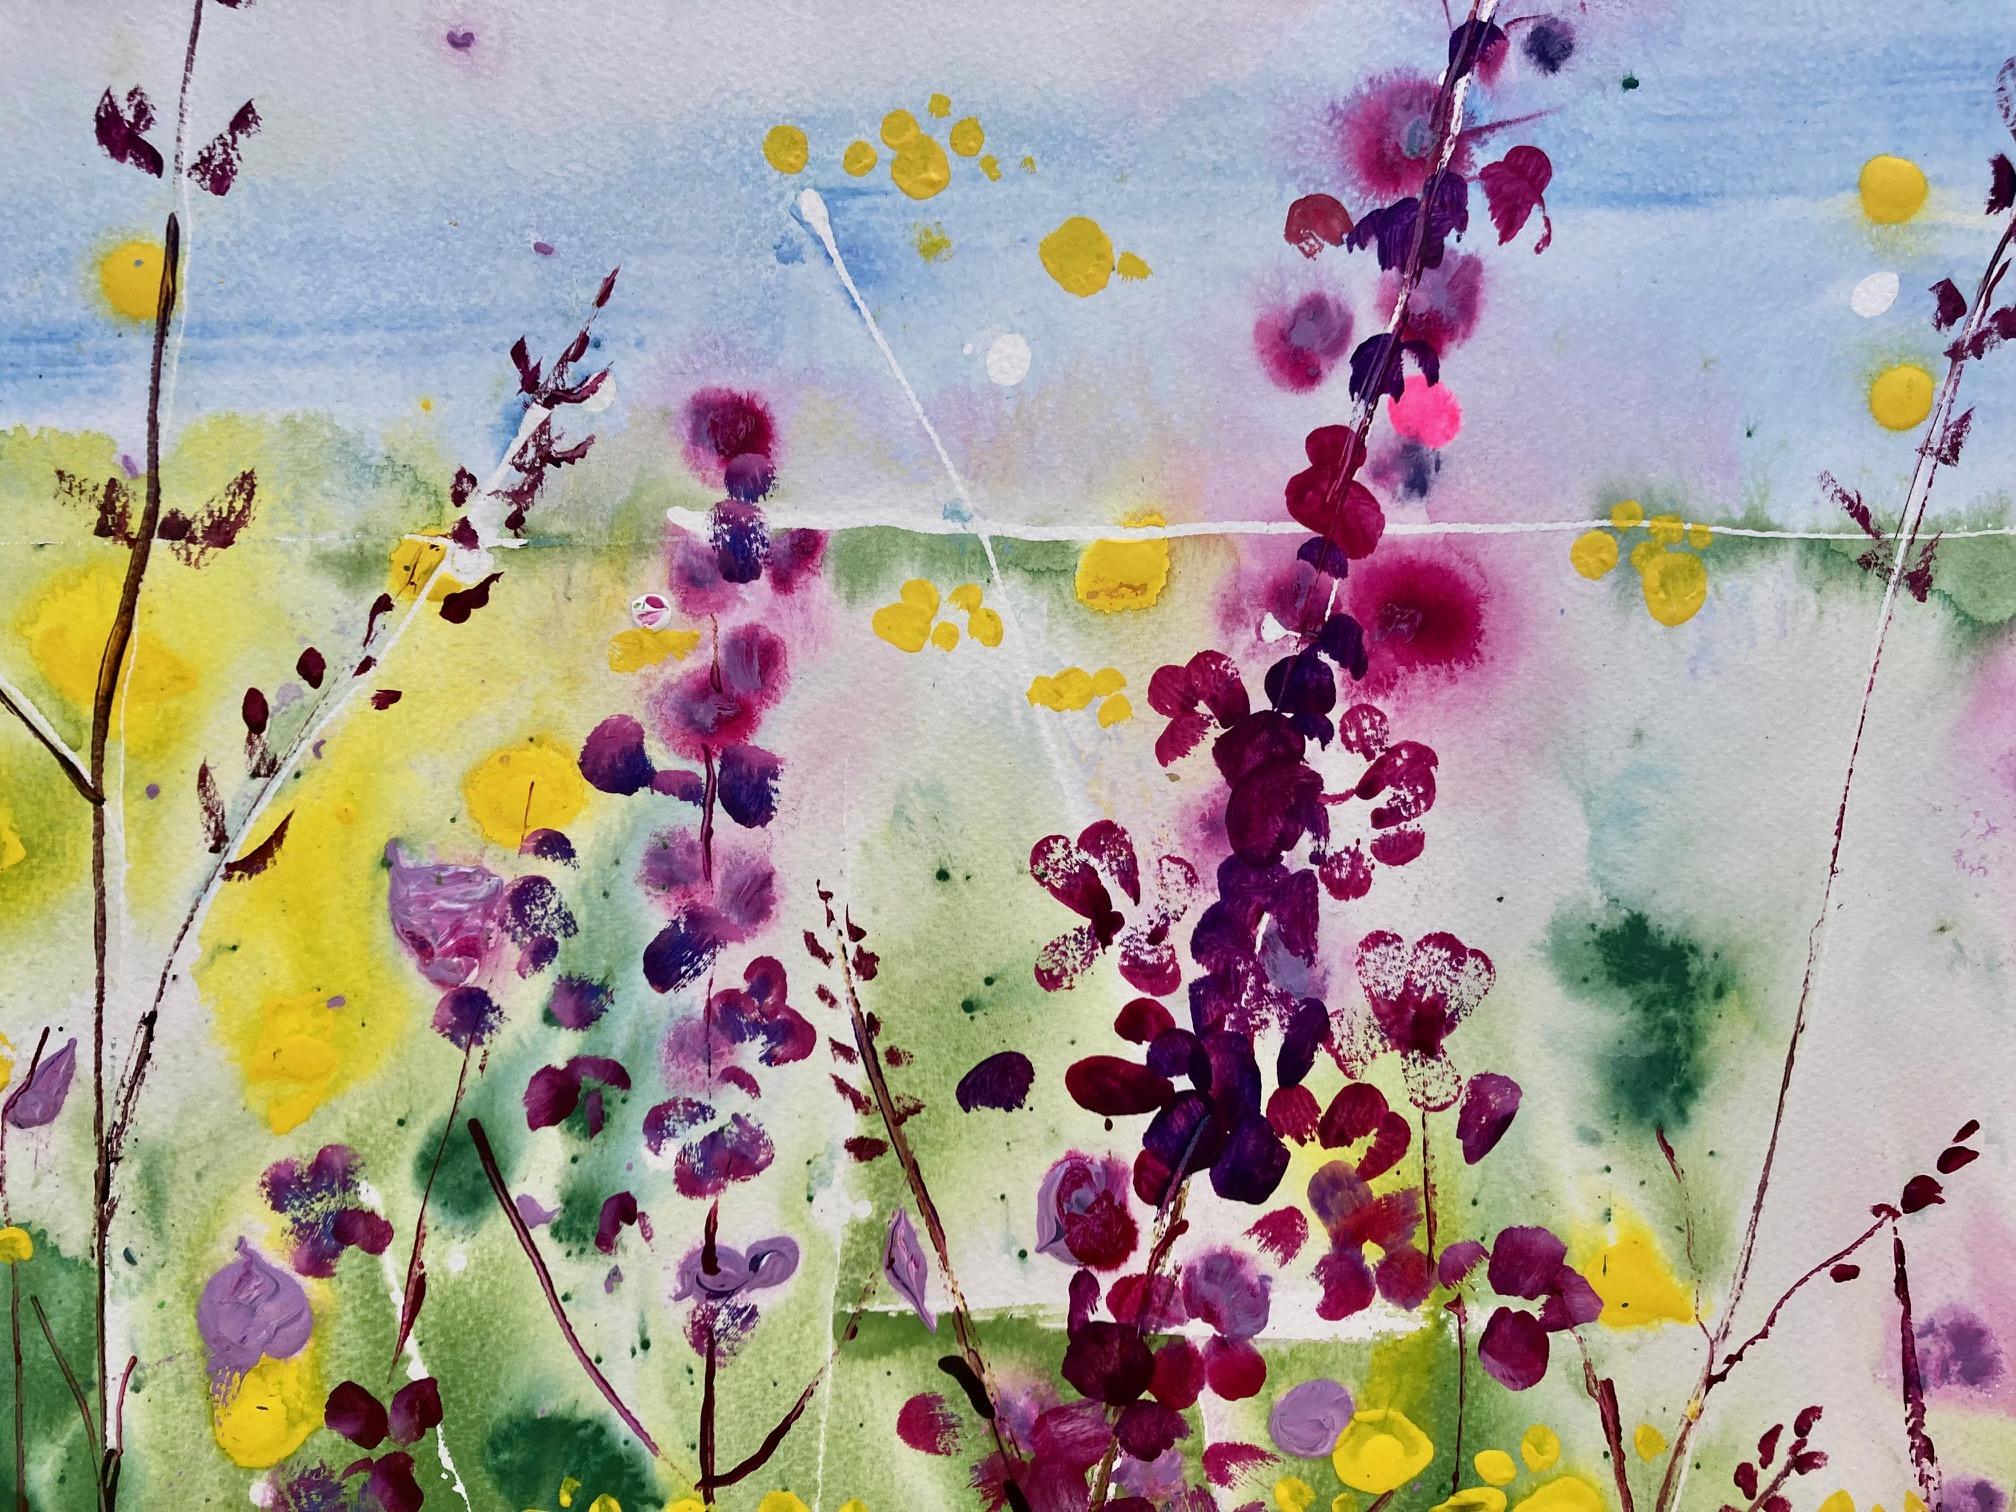 Summer Days, Bright floral art, English watercolour painting, Foxglove paintning - Beige Abstract Painting by Racheal Dalzell